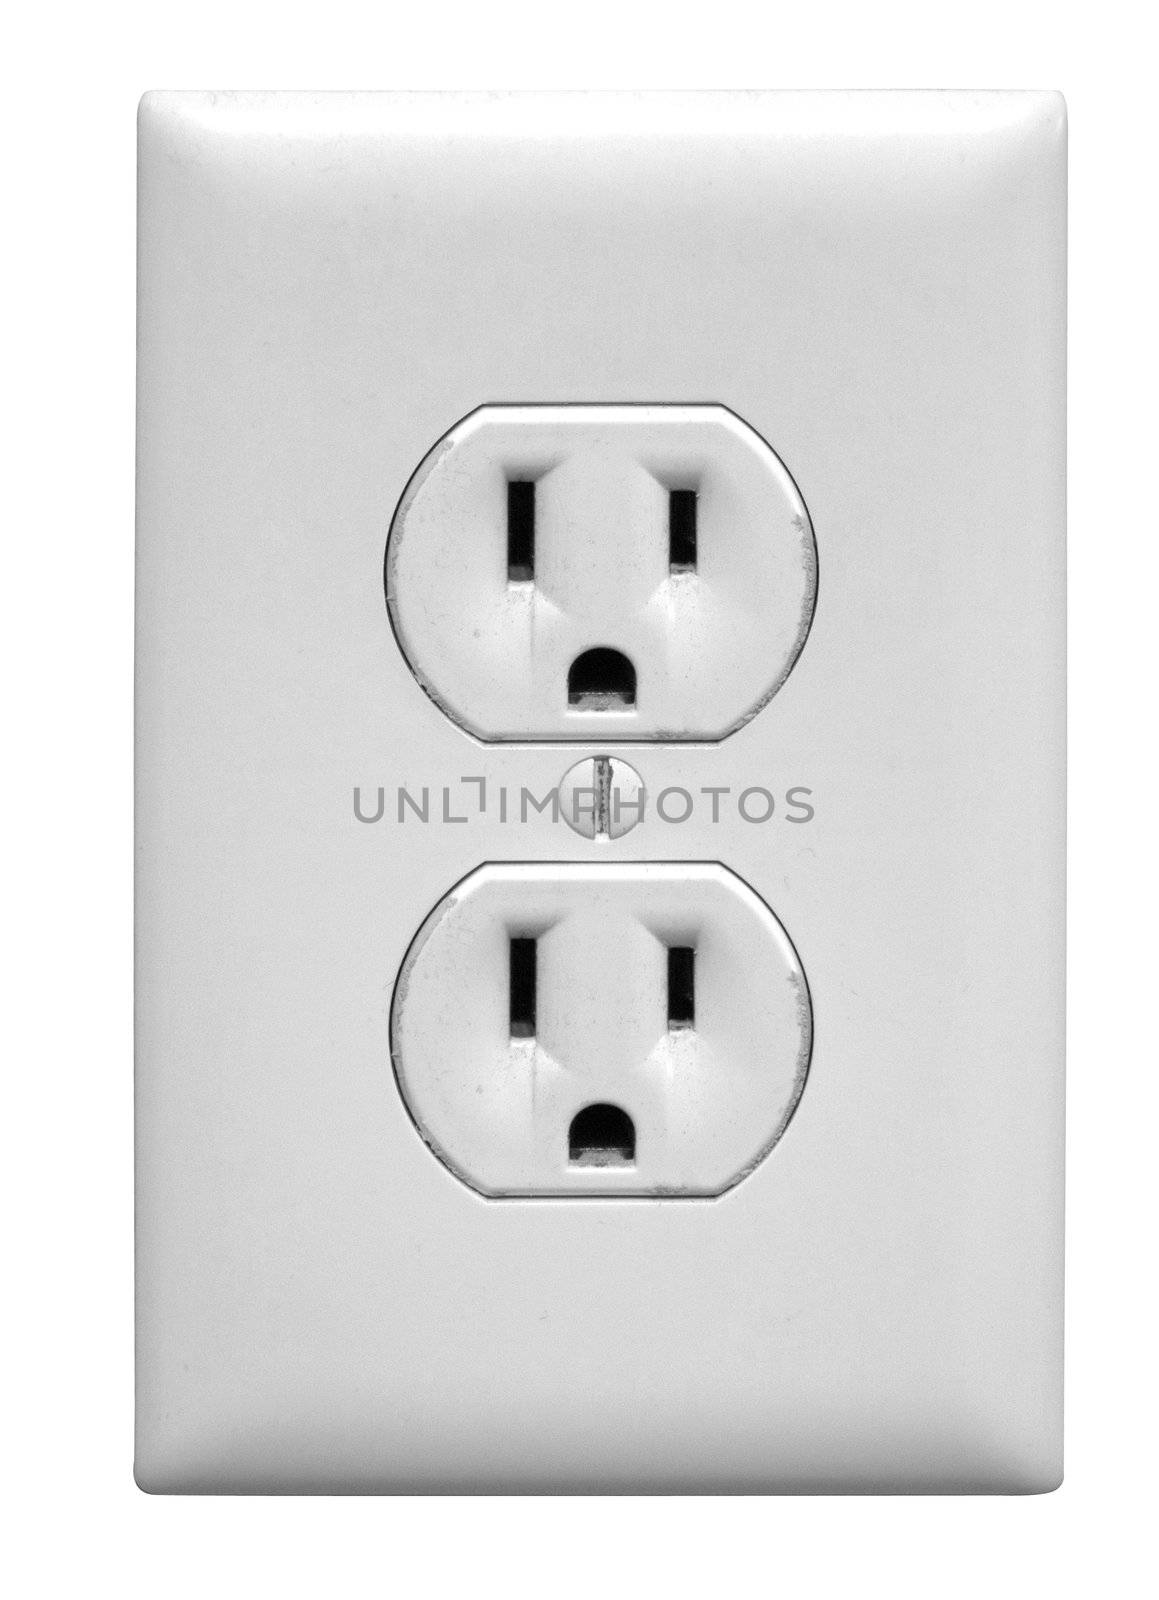 North America Electrical Outlet by jeremywhat